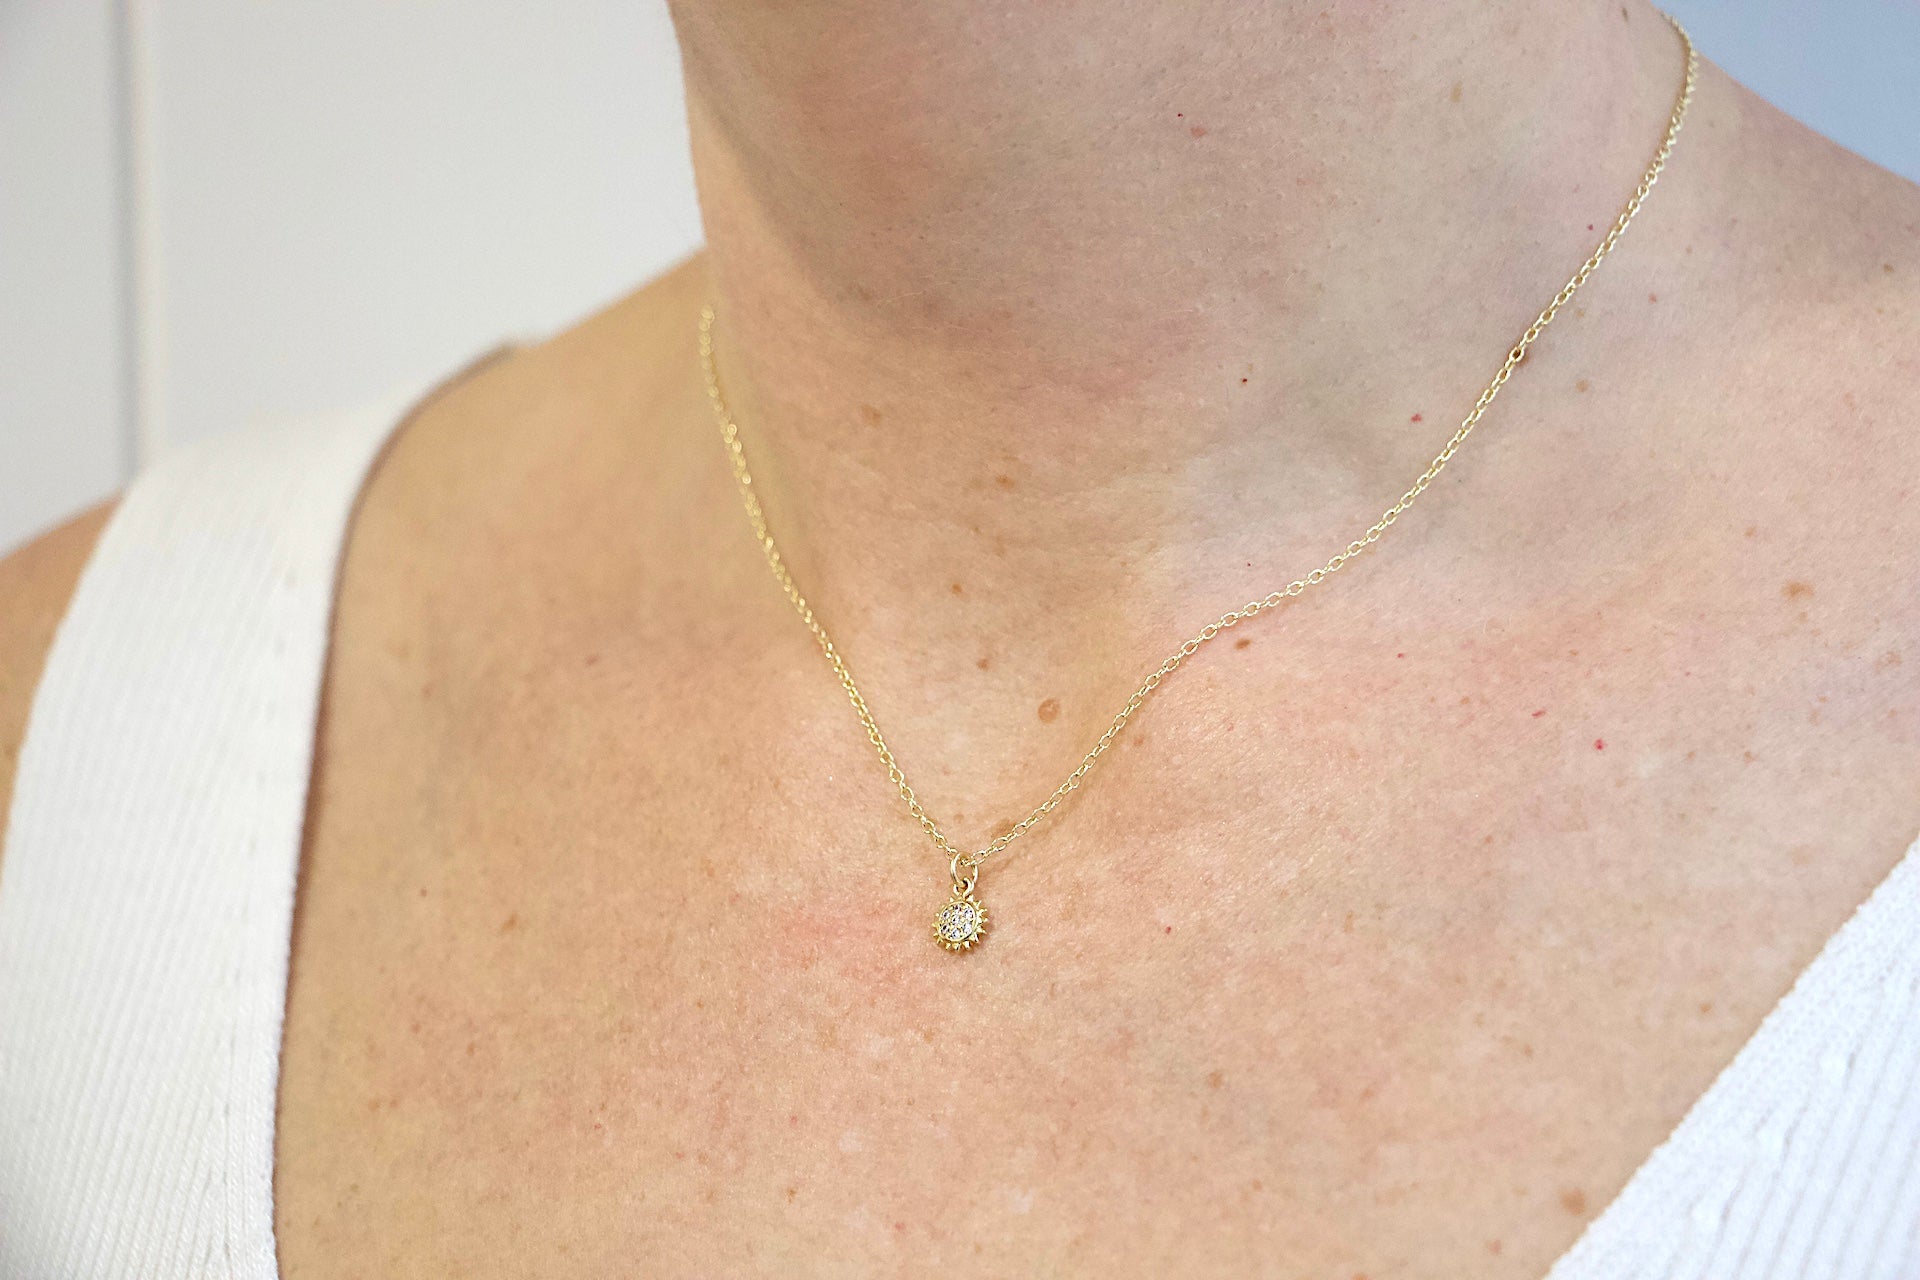 Model wearing AW Boutique's gold filled 16 inch dainty necklace with a mini Sun charm pendant. Part of Celestial collection. Gold filled jewellery. 